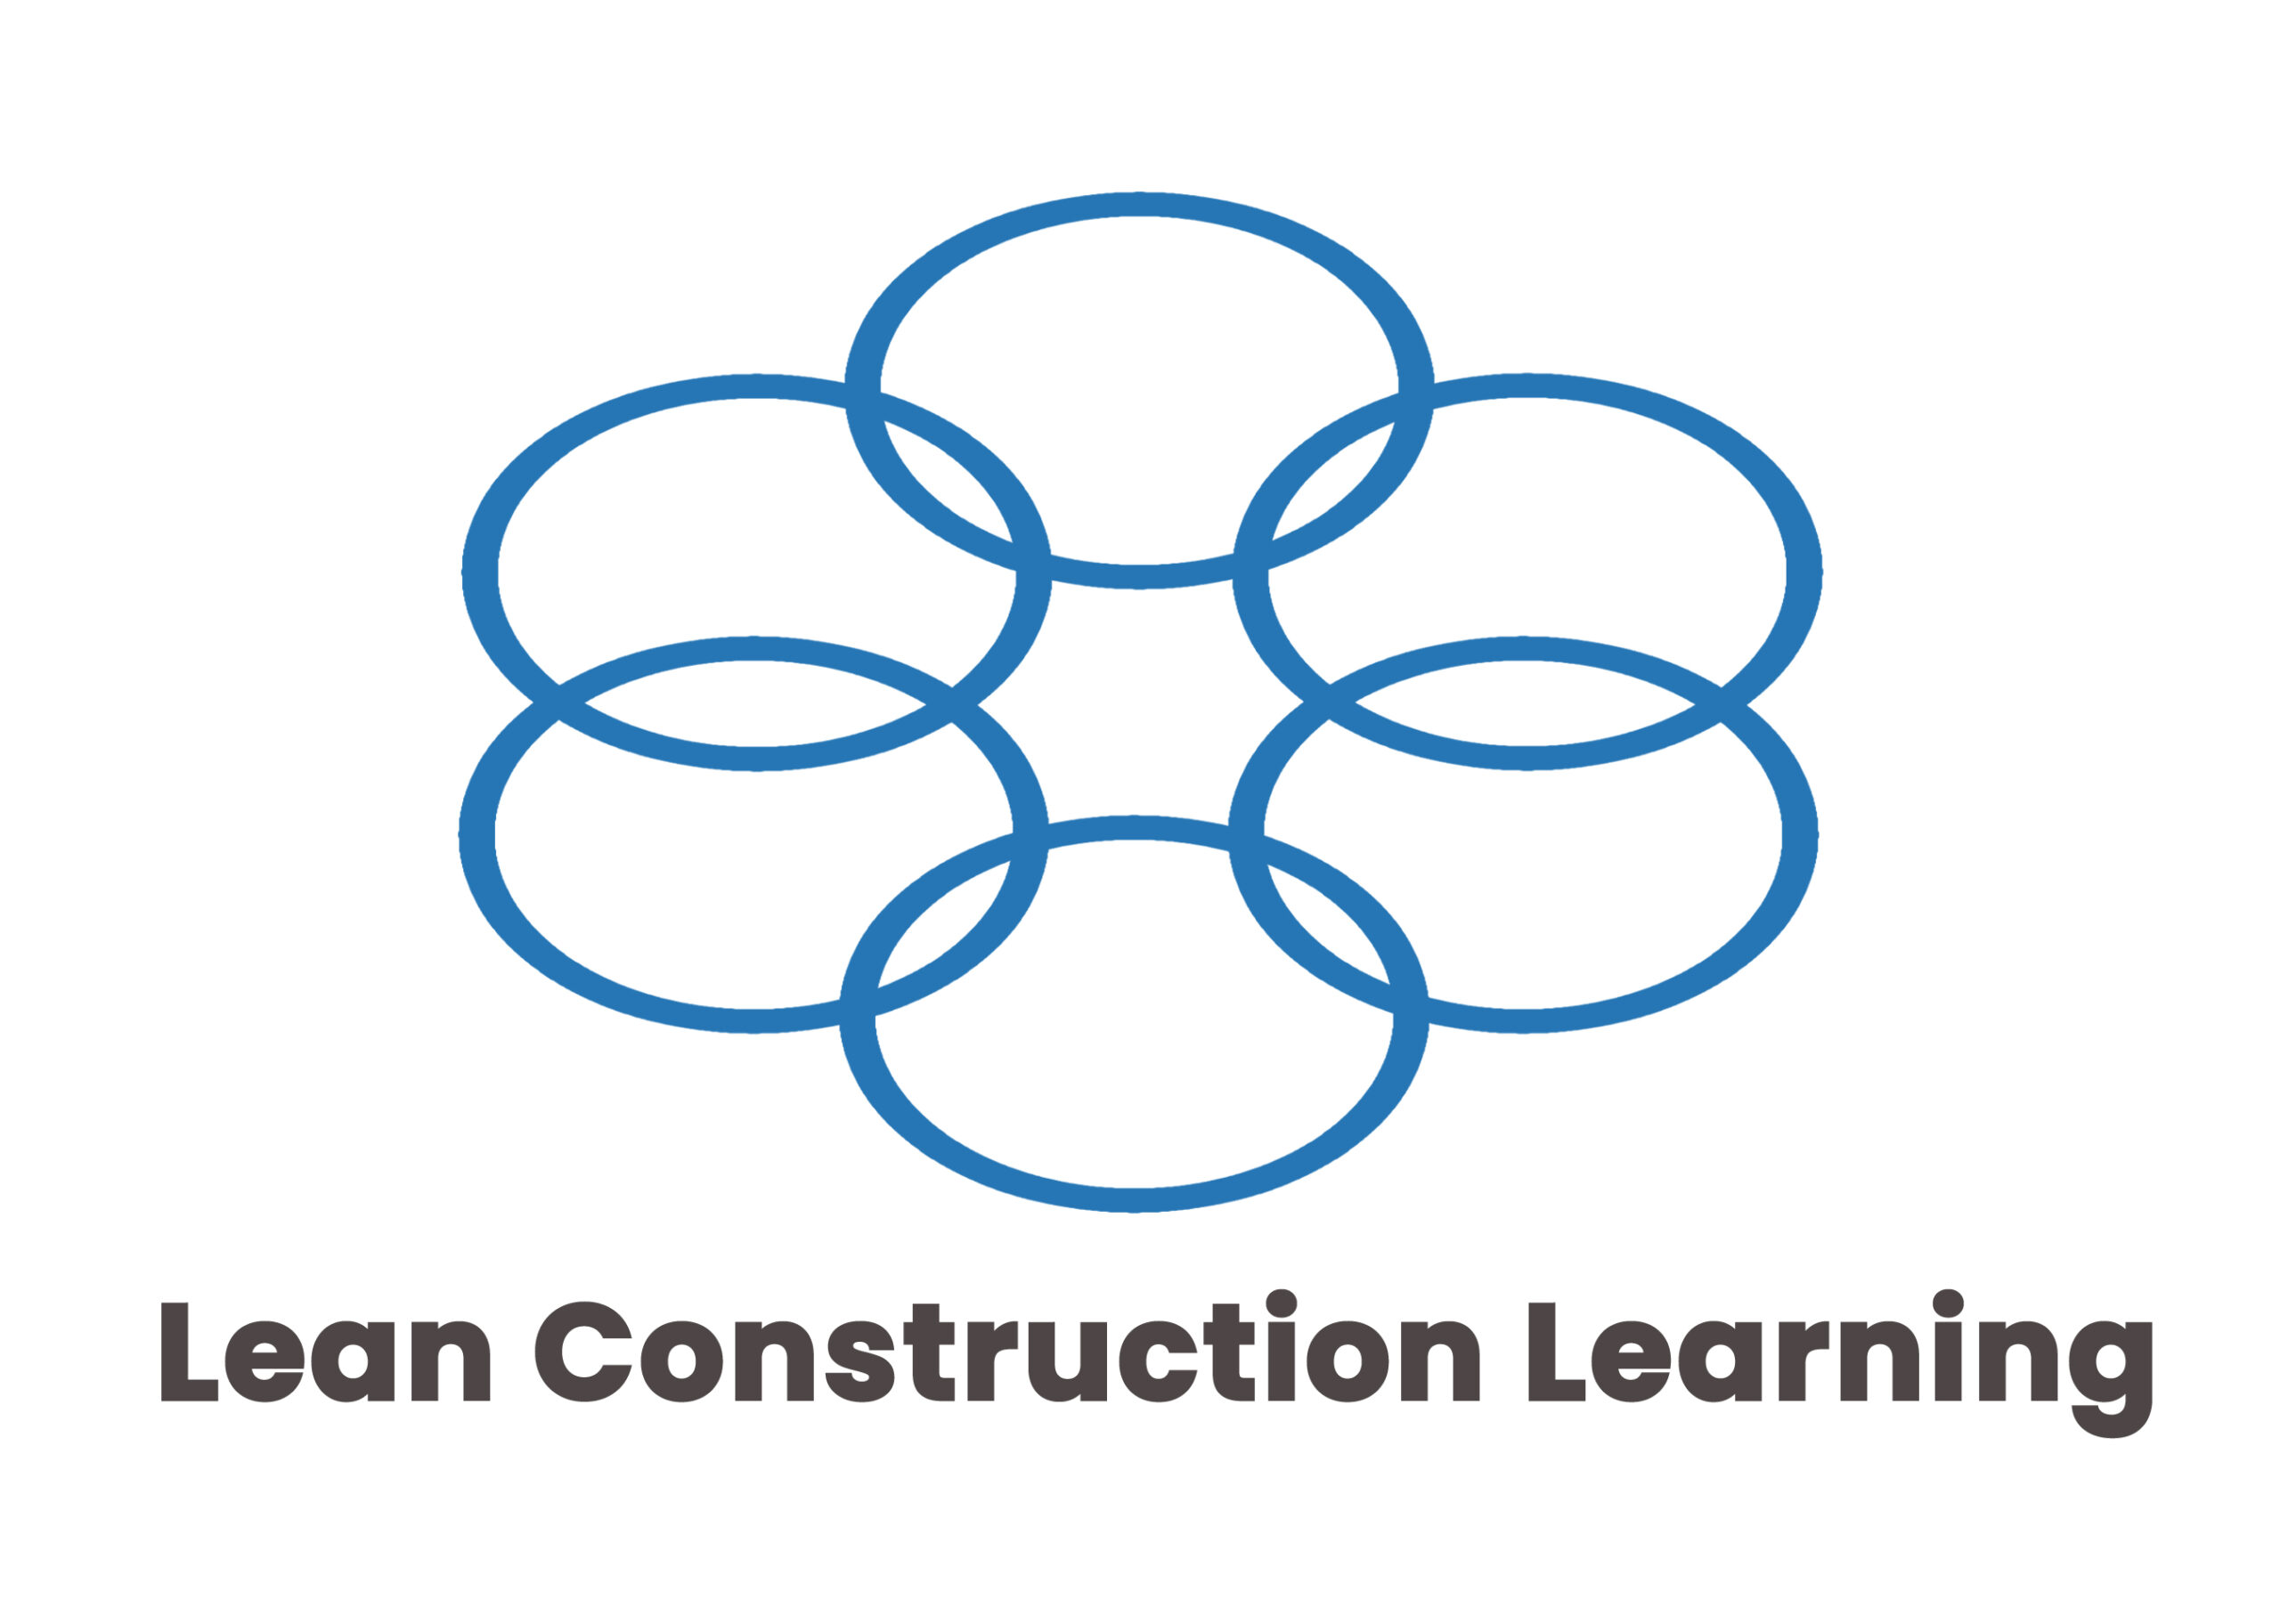 Lean Construction Learning